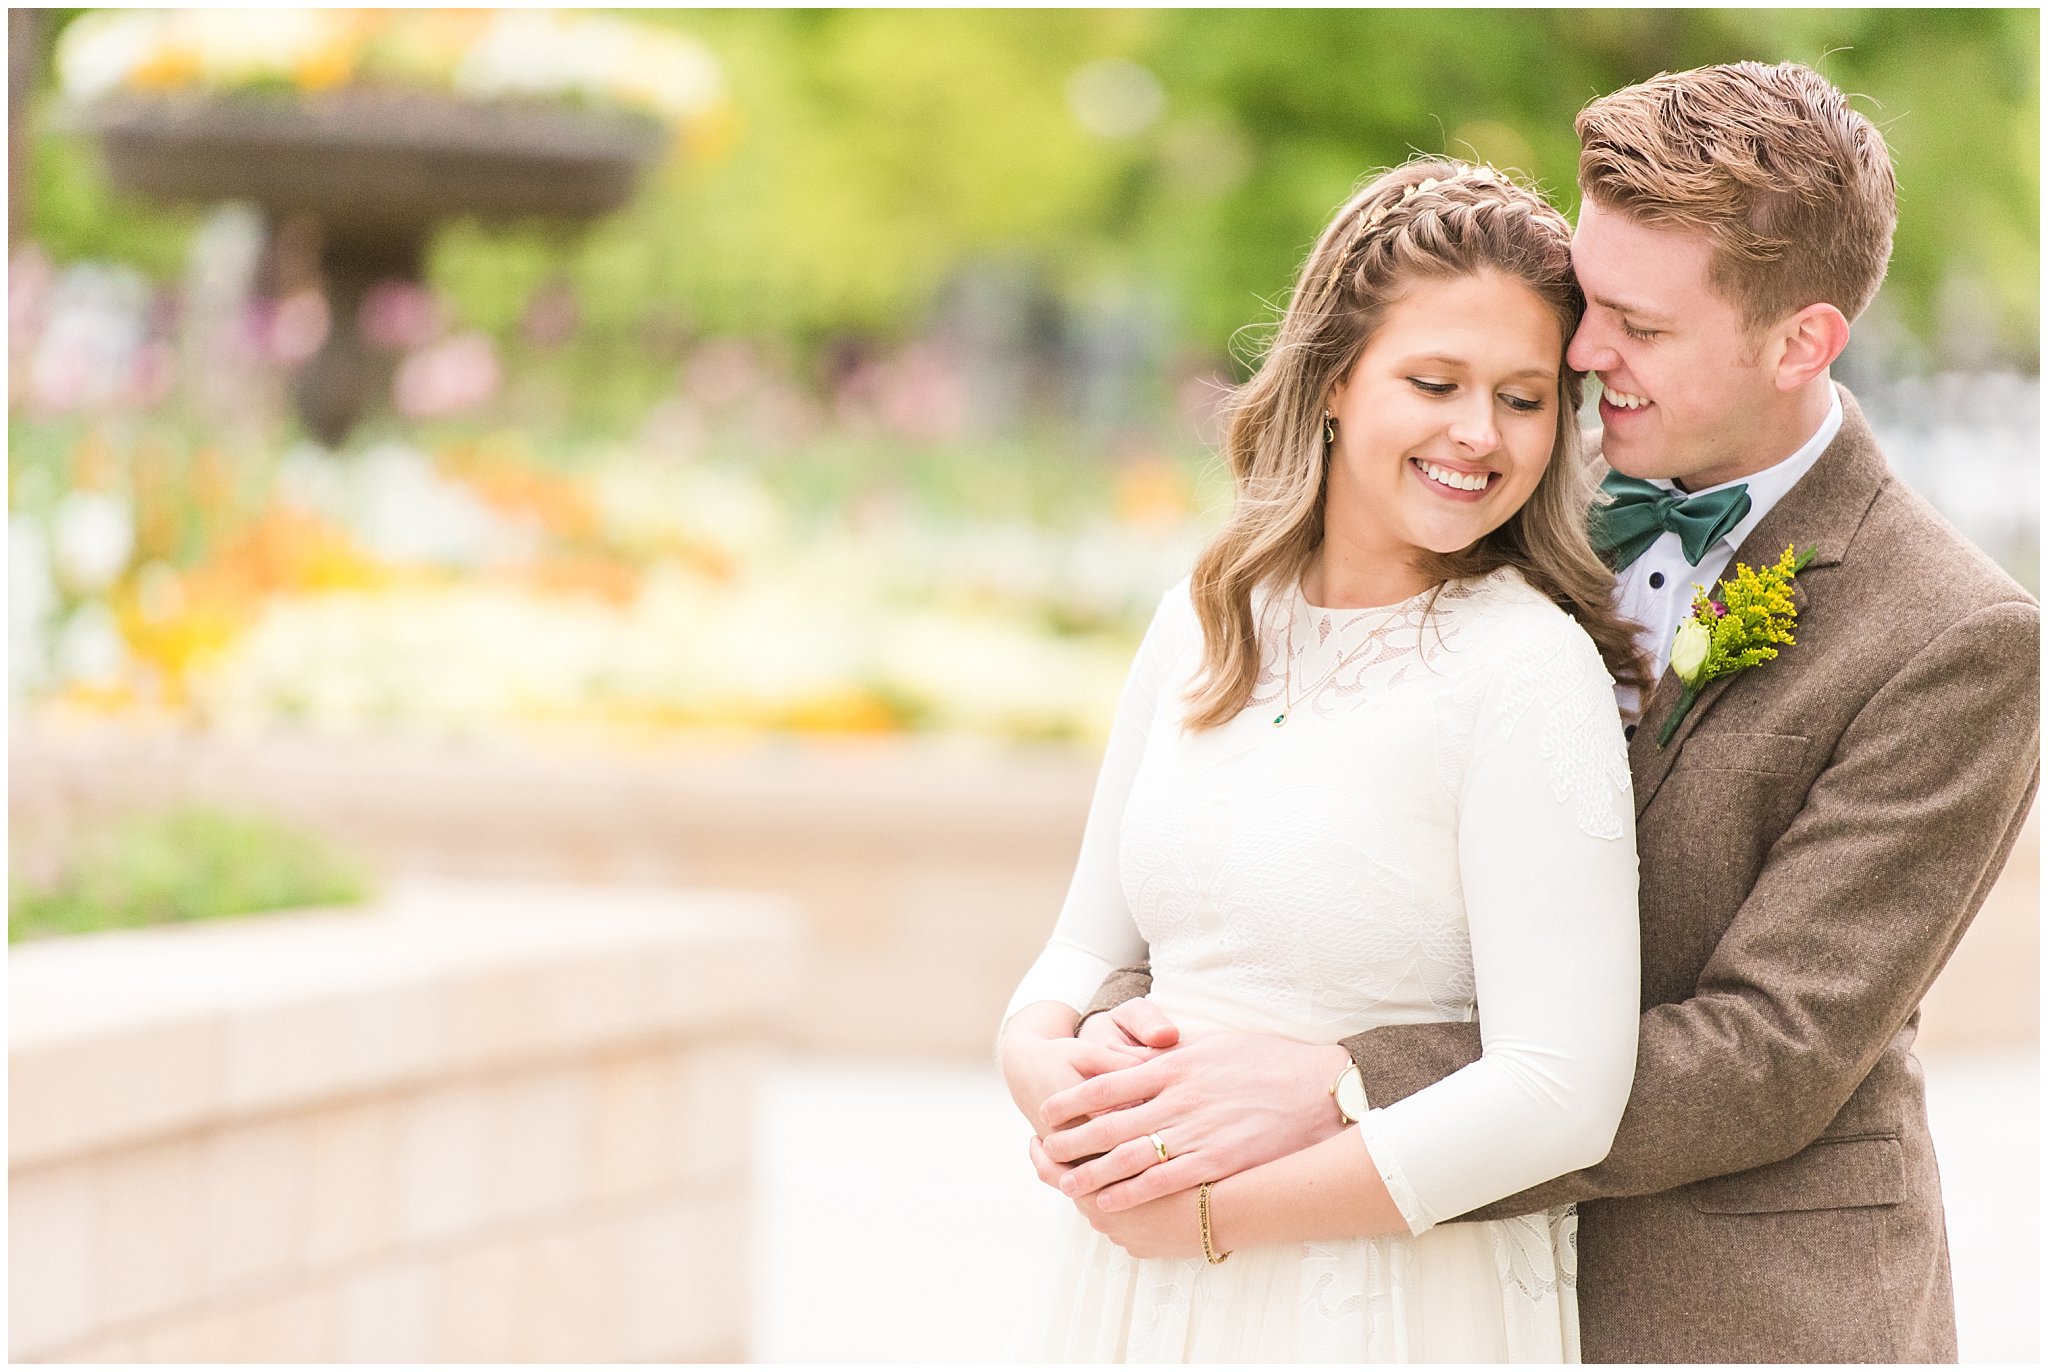 Bride wearing flowy dress and groom wearing tweed suit and green bow tie for vintage inspired wedding attire | Emerald green, gold wedding colors | Provo City Center Temple Spring Formal Session | Jessie and Dallin Photography